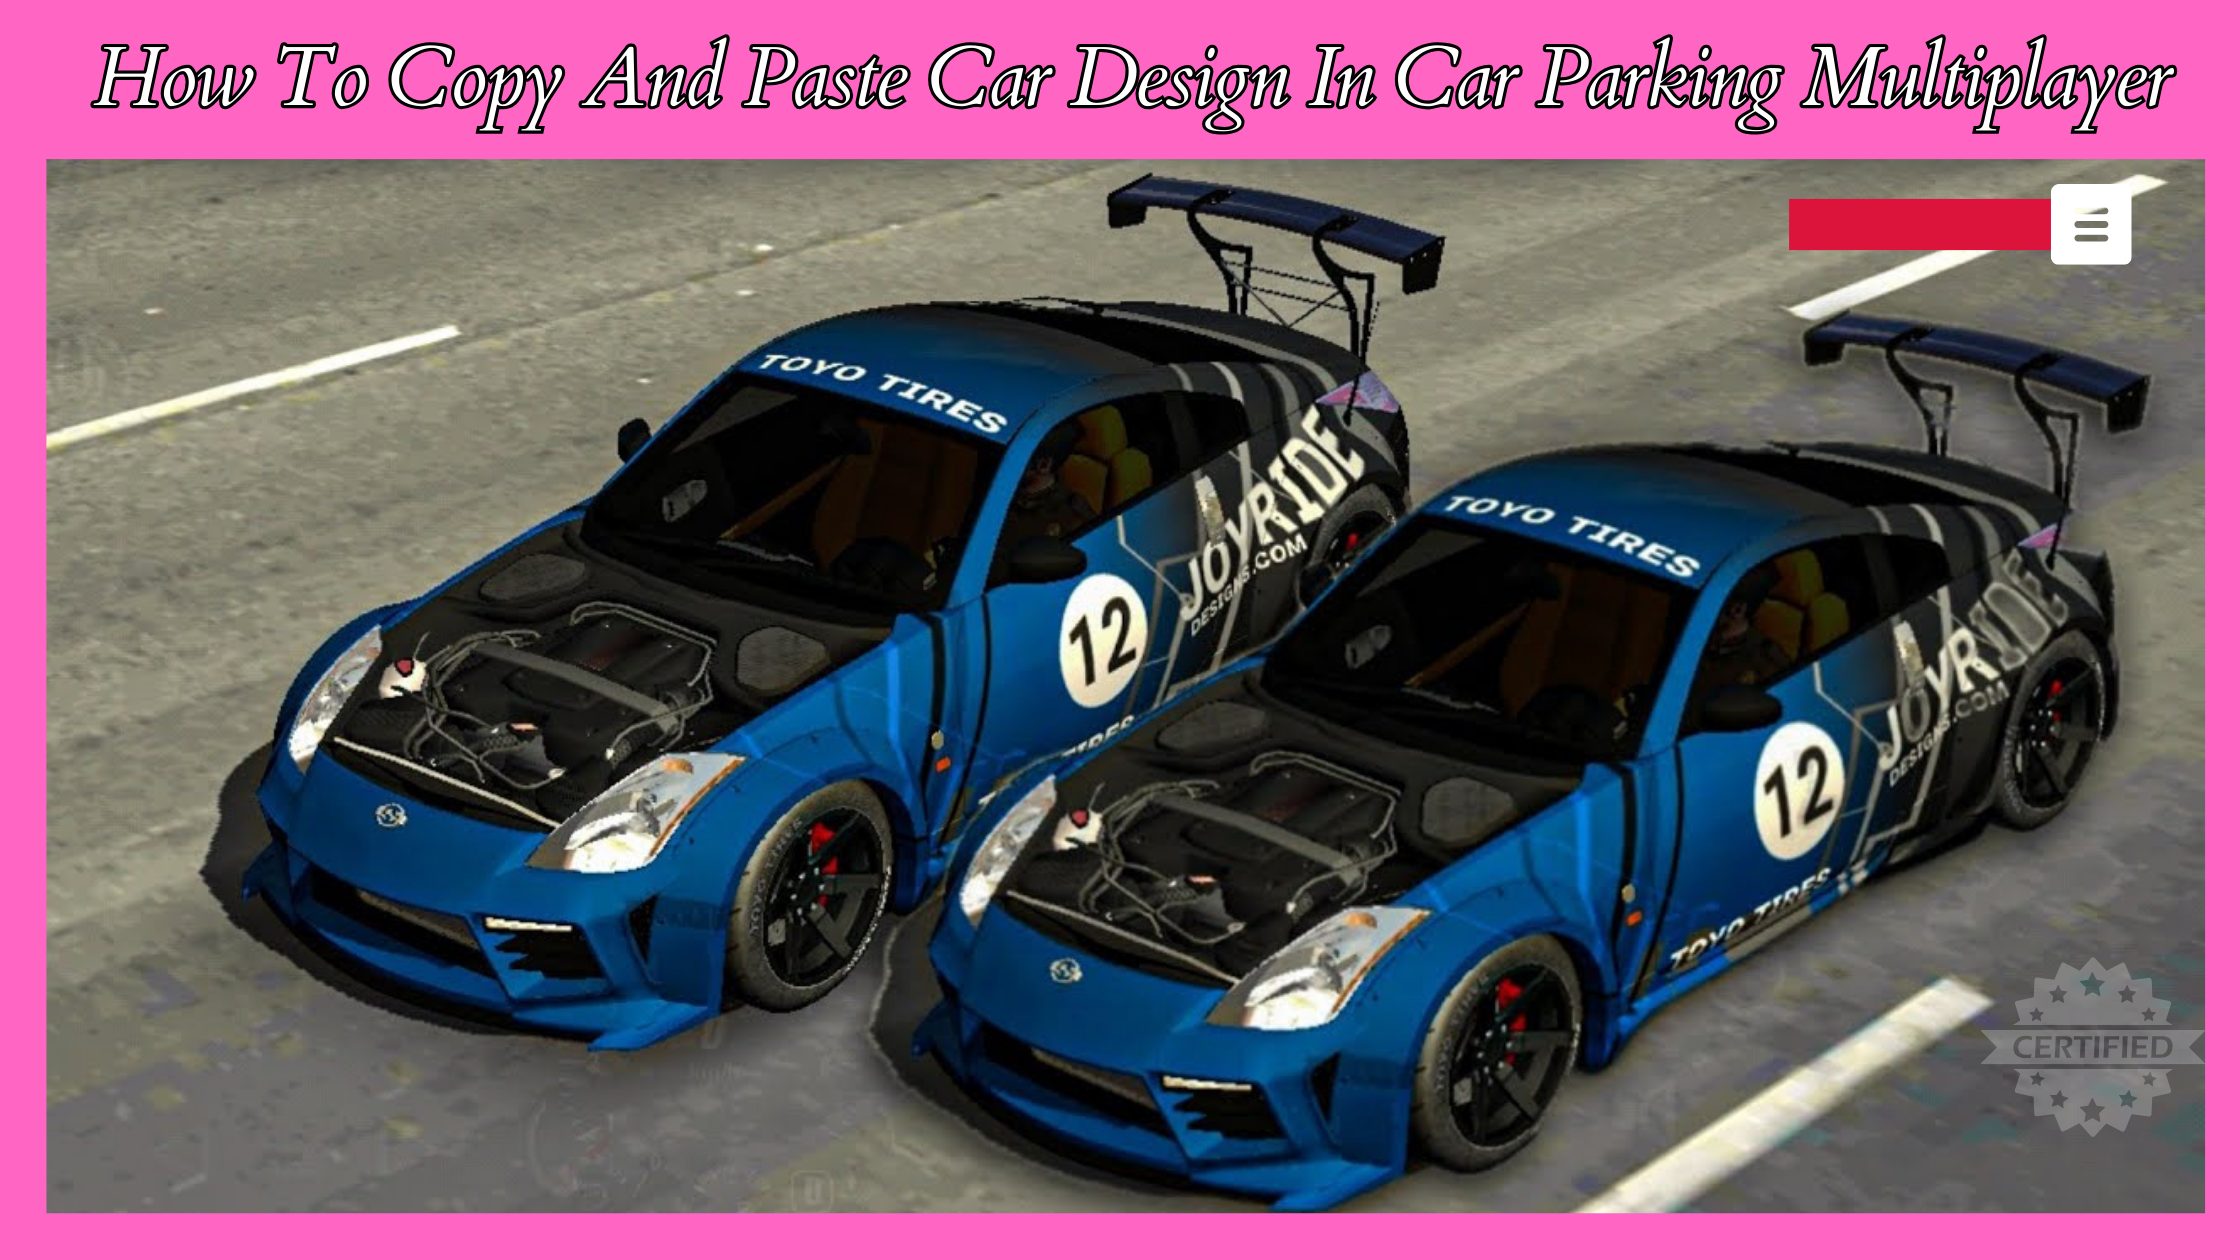 How to Copy and Paste Car Design In Car Parking Multiplayer